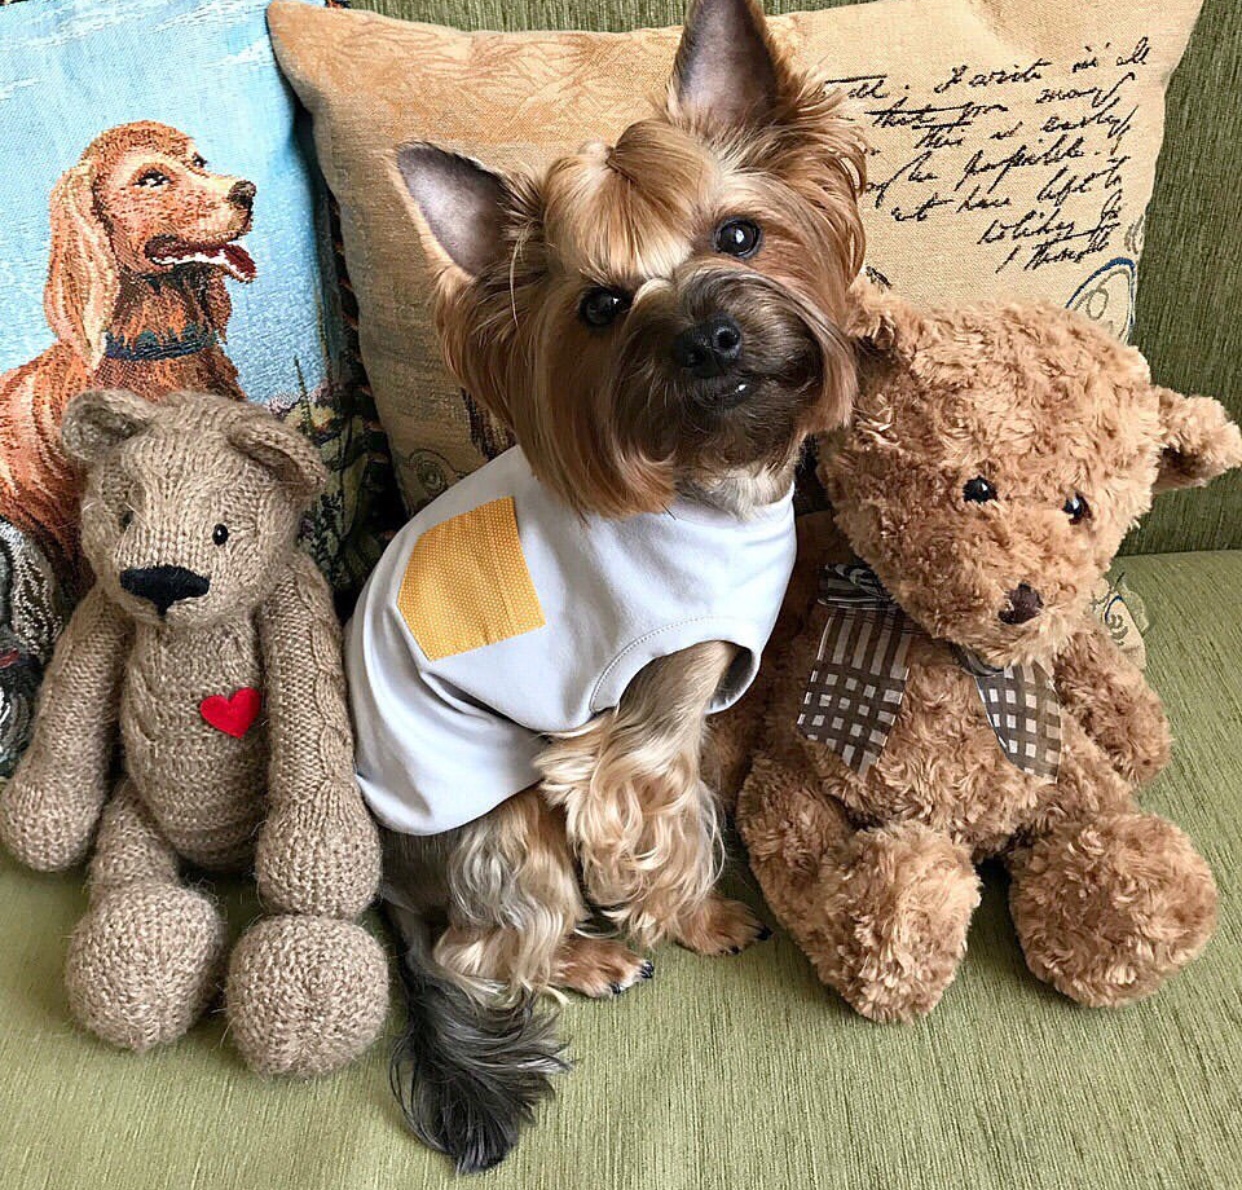 A Yorkshire Terrier wearing a shirt while sitting on the couch with its teddy bears